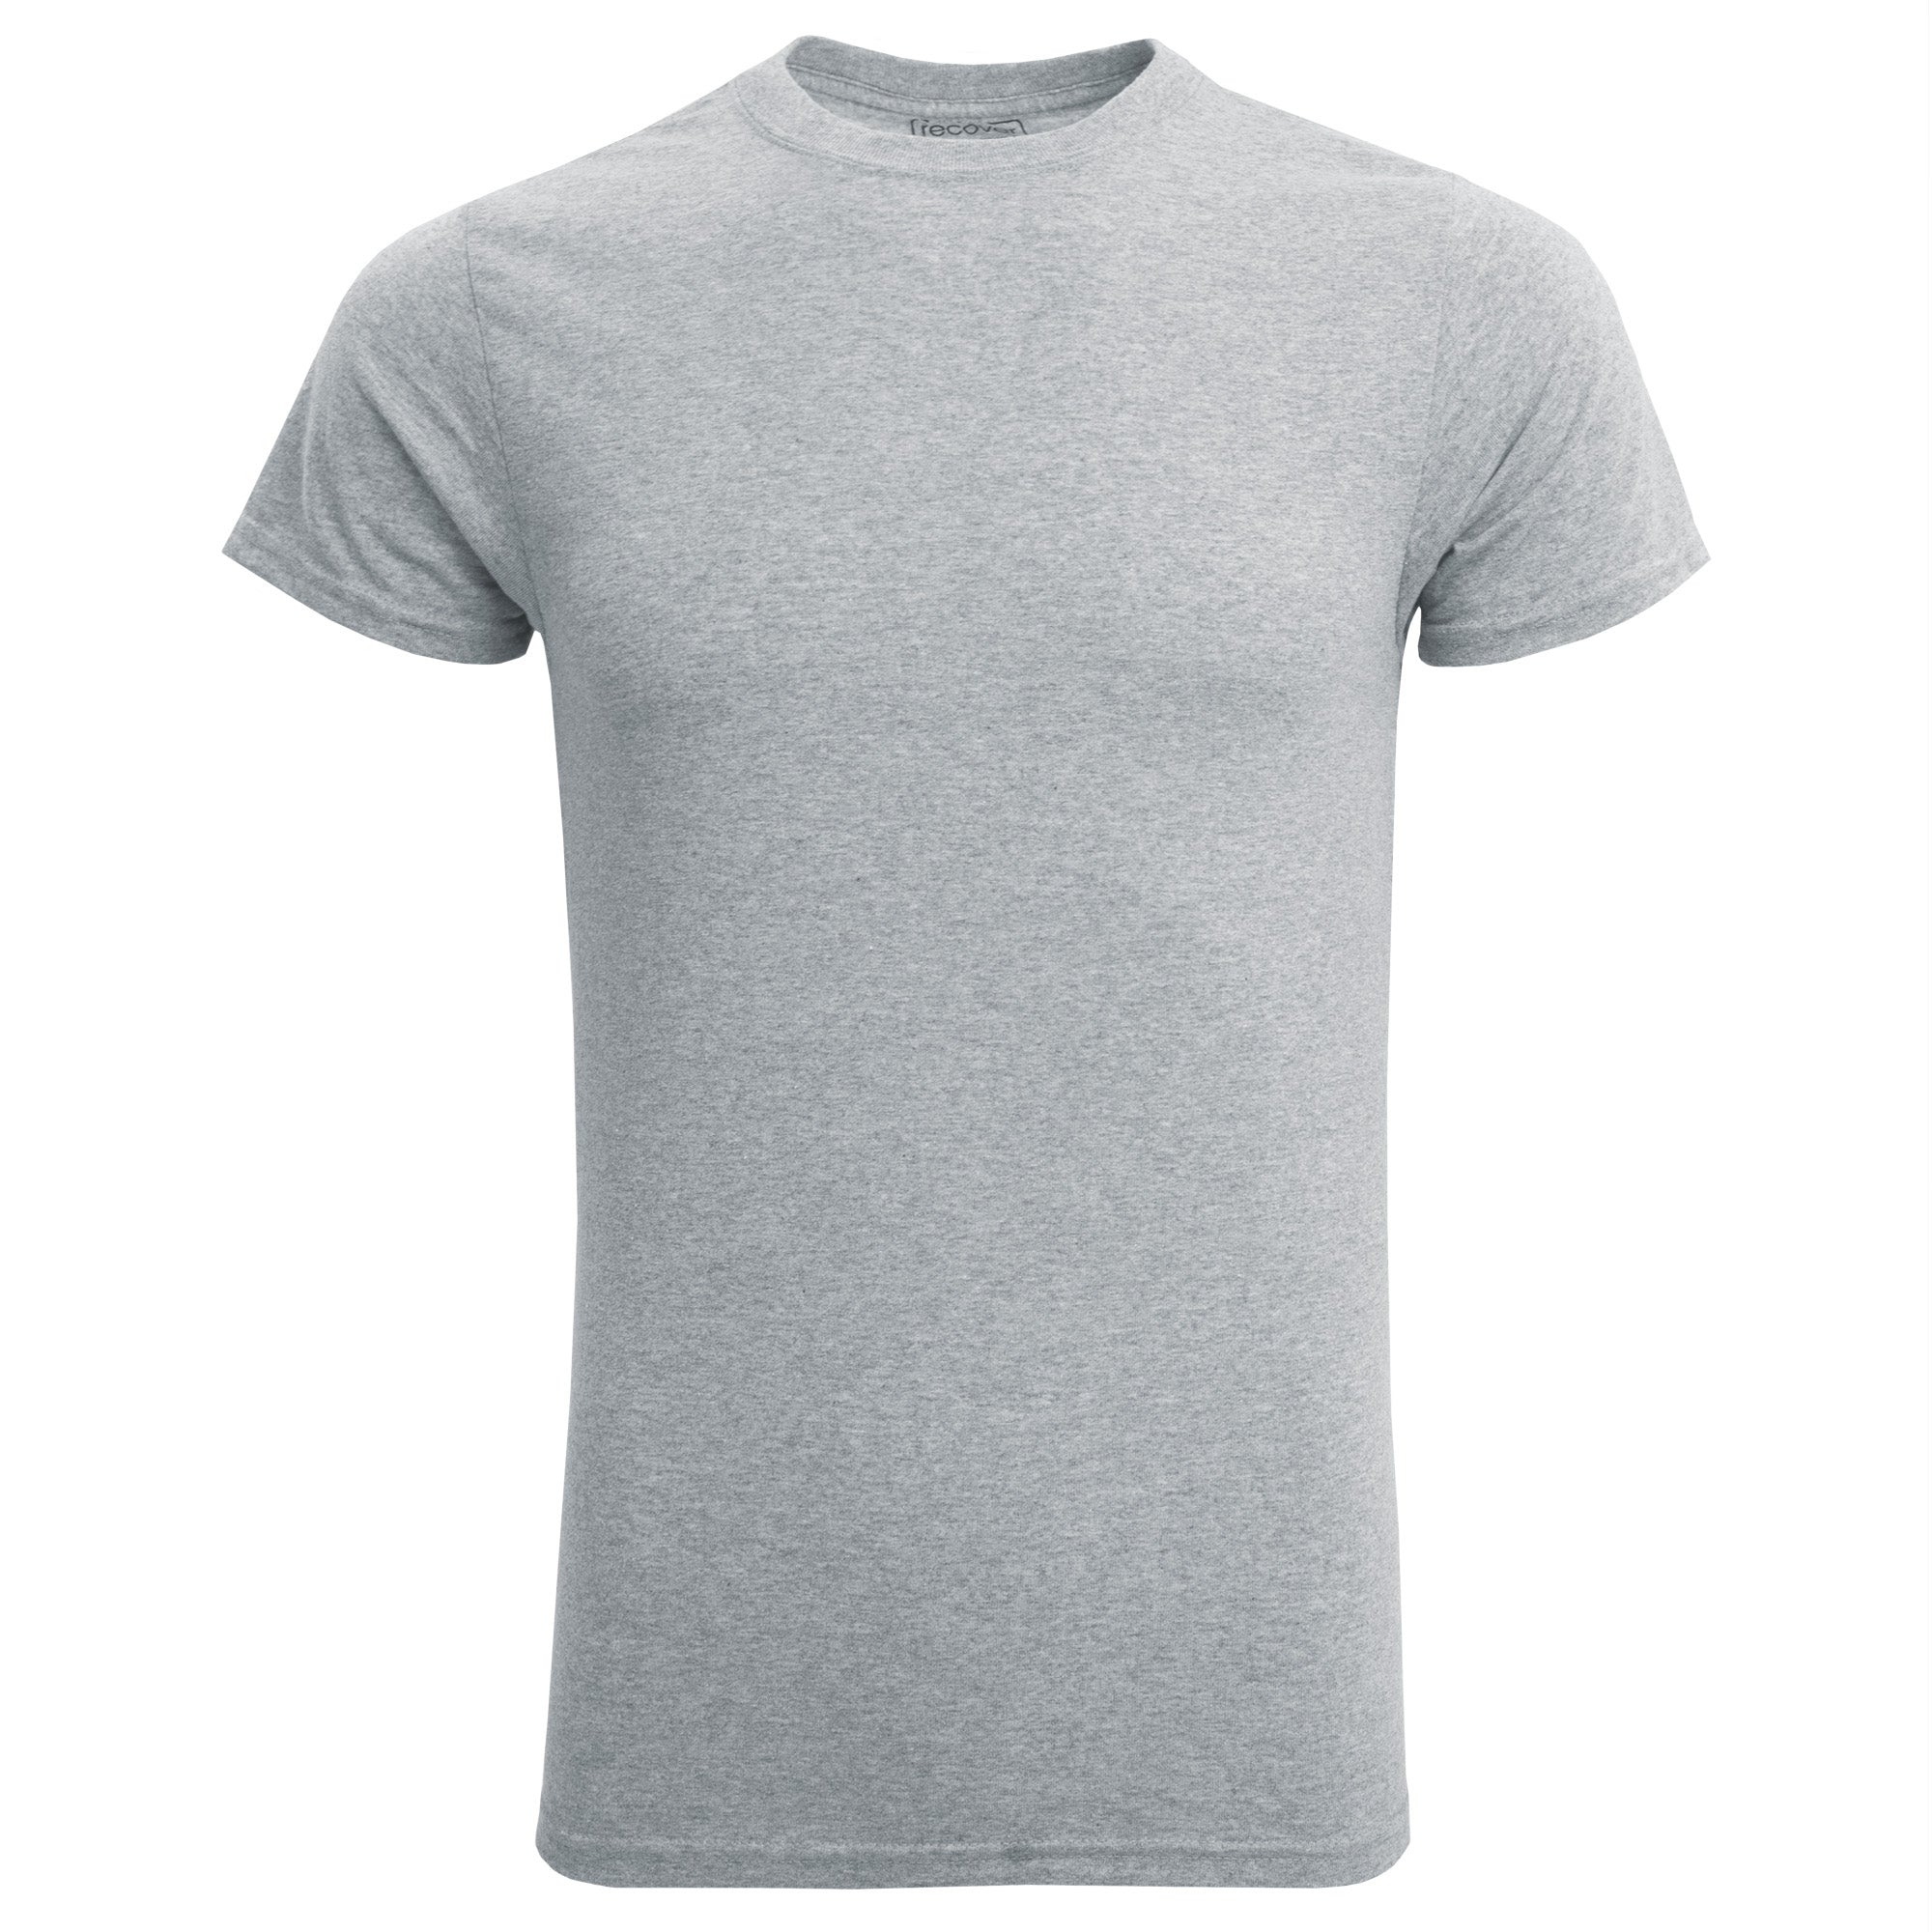 Eco-Friendly T-Shirt | Sustainable Apparel | Men's Shirts | Recover ...